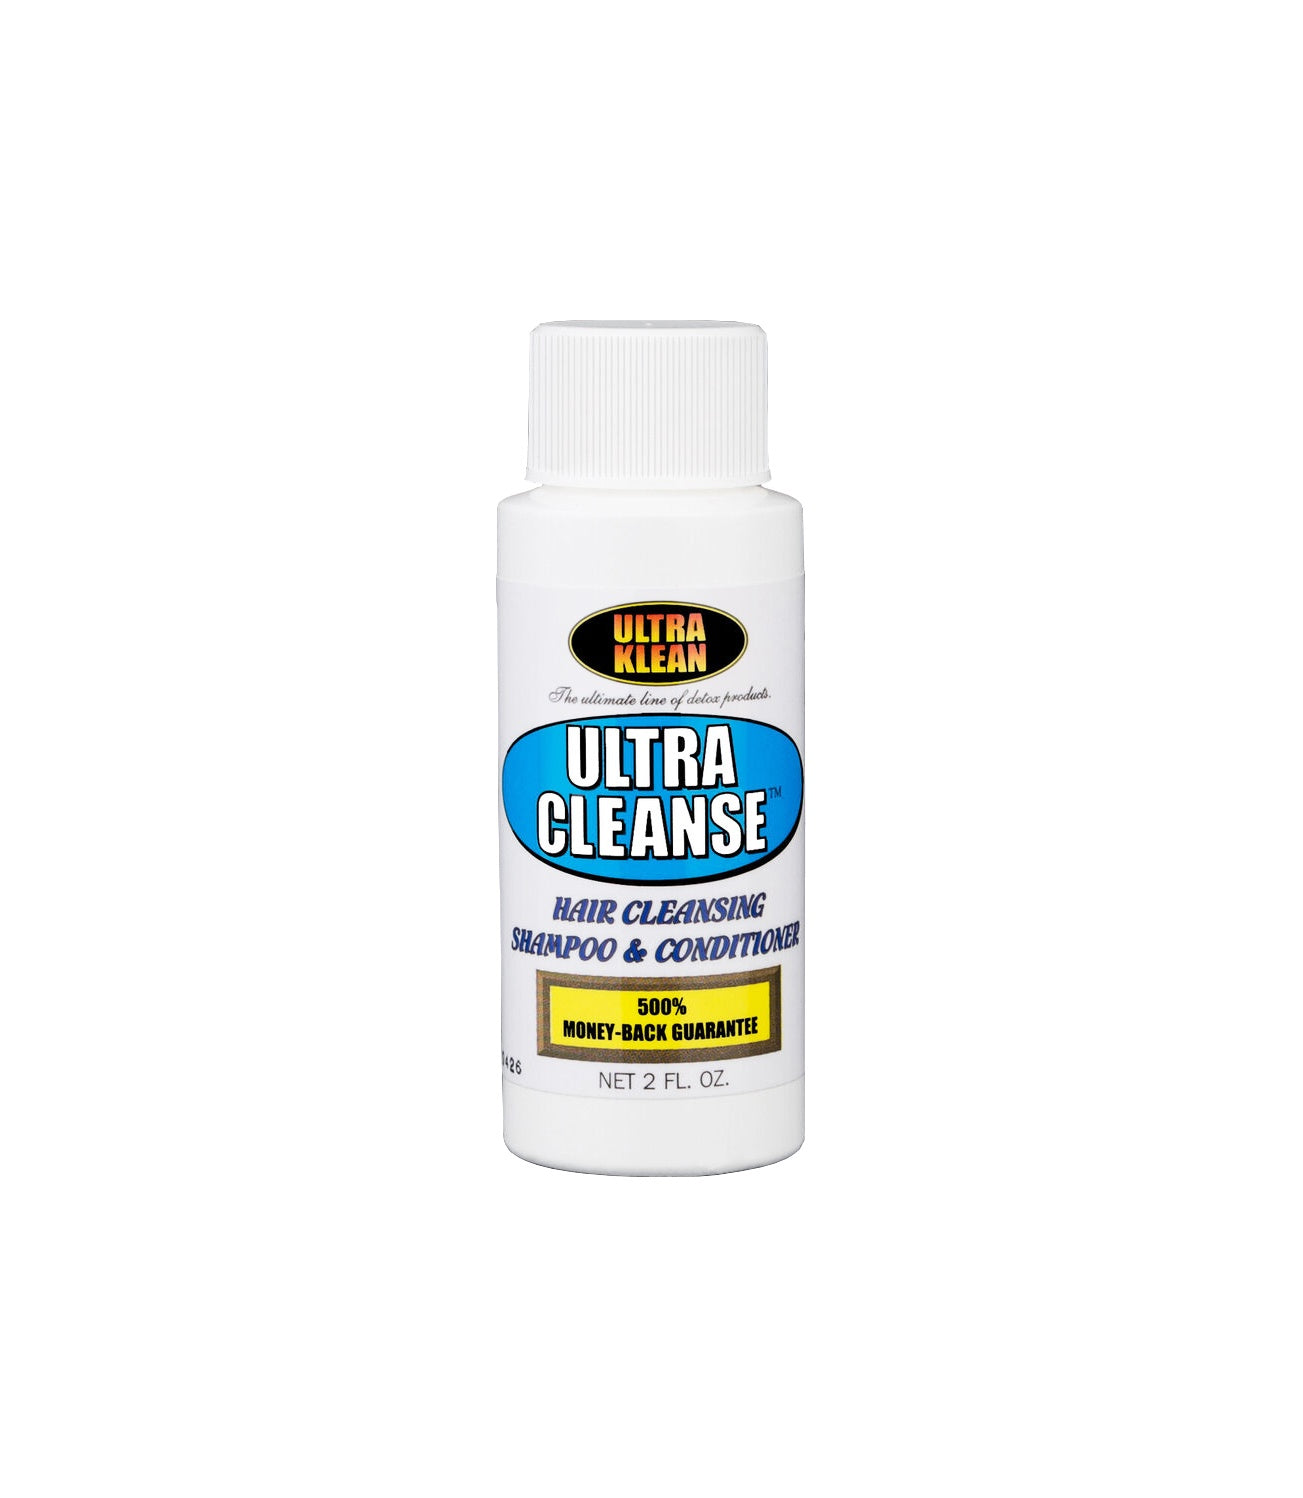 Ultra Klean Ultra Cleanse Shampoo & Conditioner 60ml